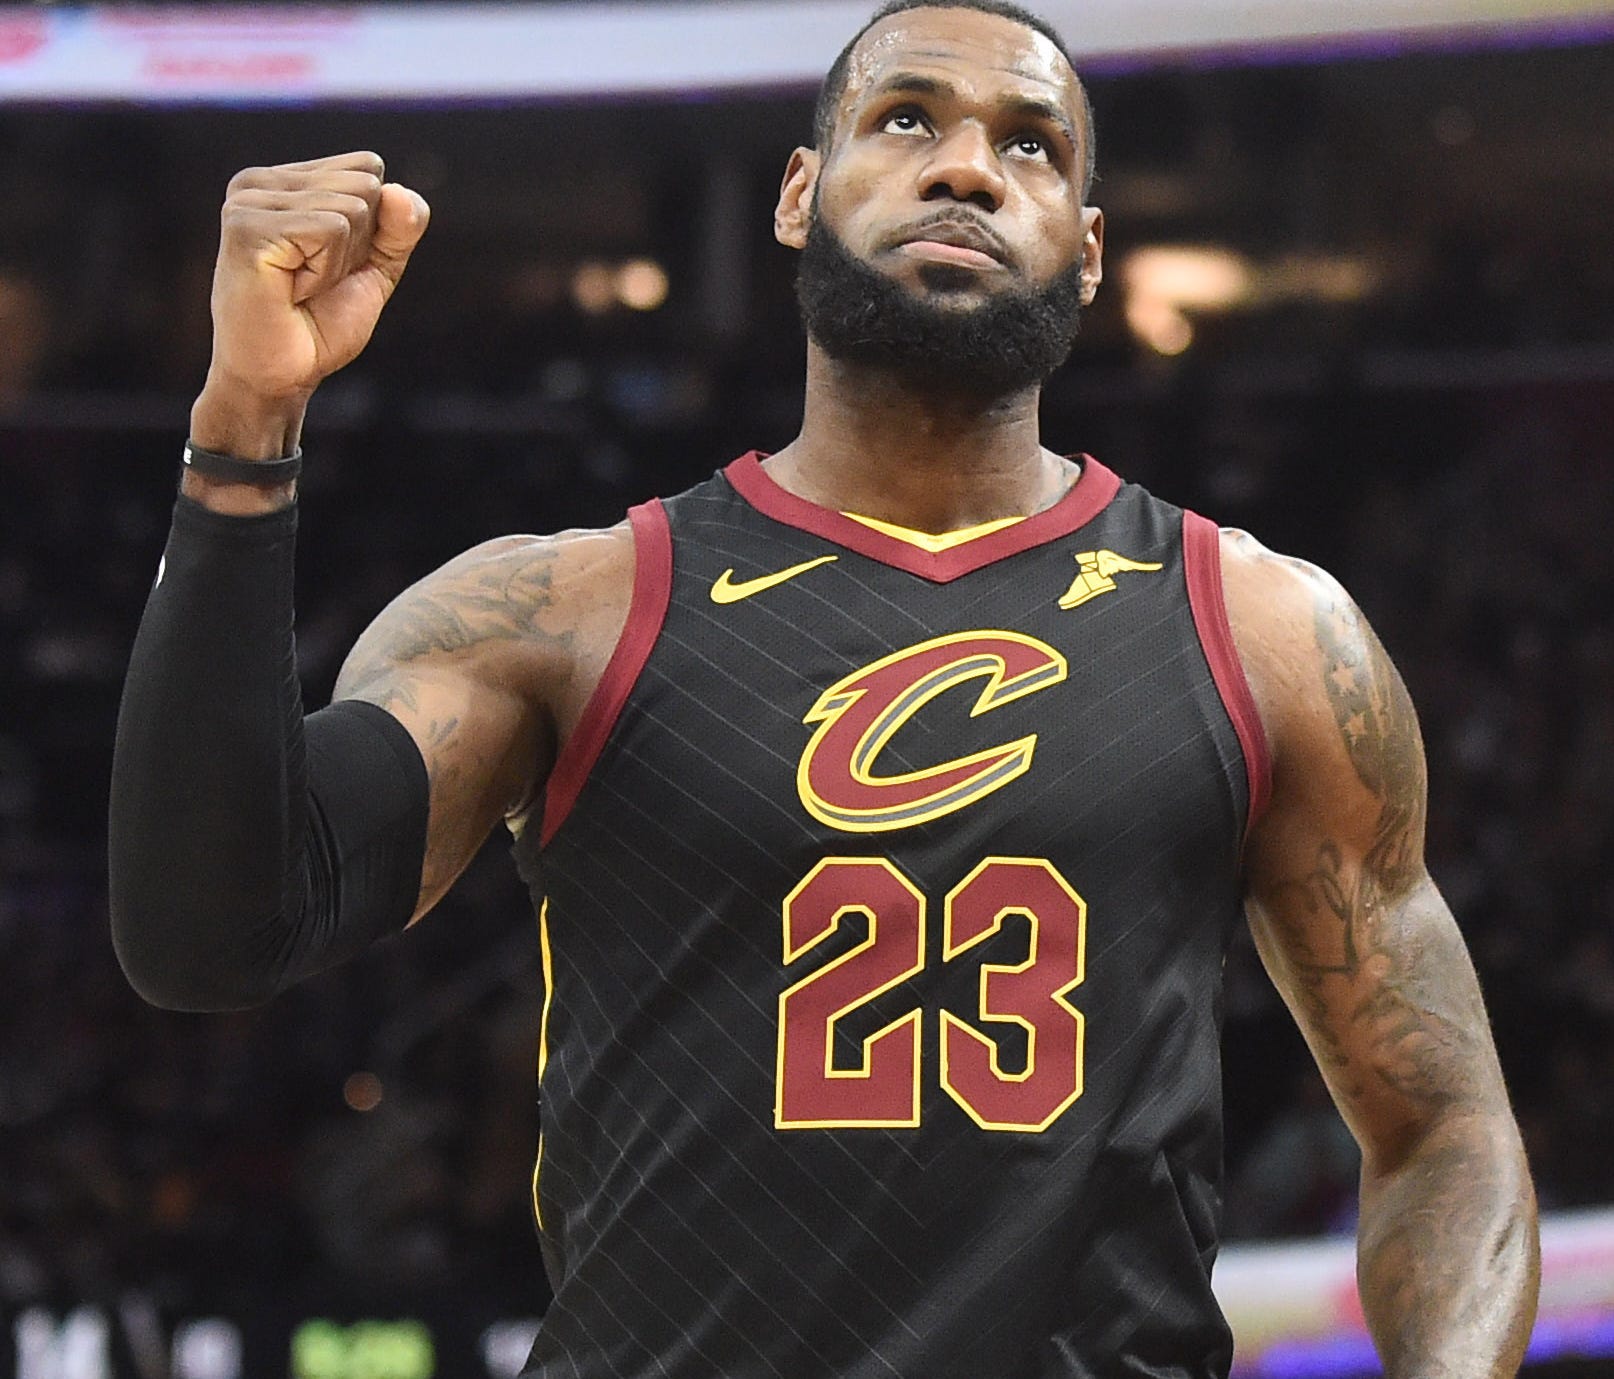 Cleveland Cavaliers forward LeBron James (23) reacts after a basket during the first half against the Indiana Pacers in game seven of the first round of the 2018 NBA Playoffs at Quicken Loans Arena.